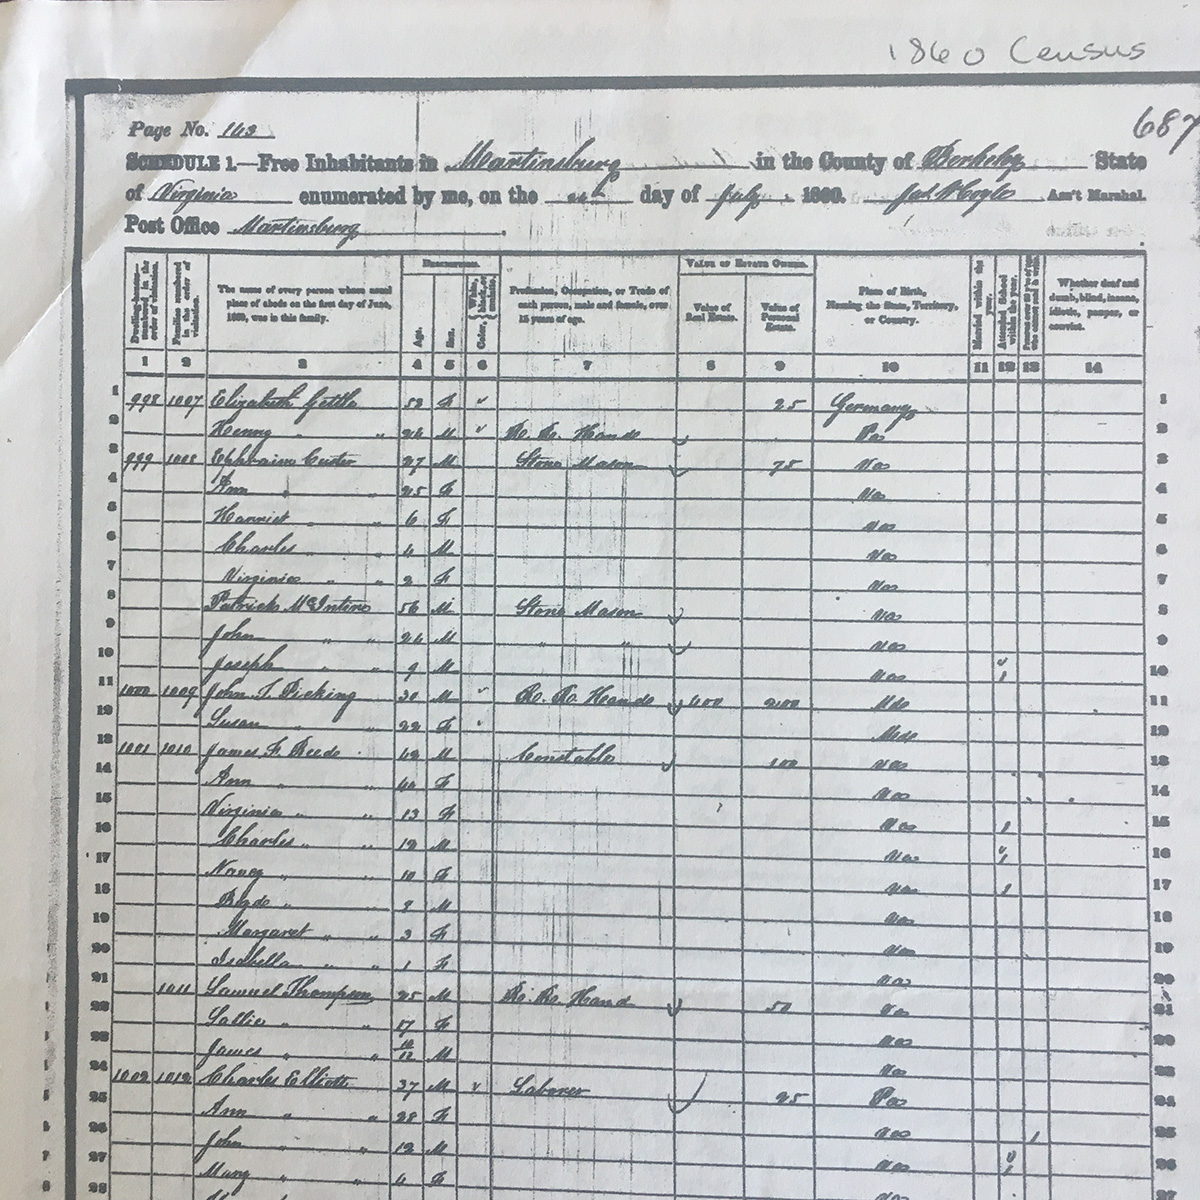 1860 census records for Martinsburg, listing Belle's entire family (God bless the census!).